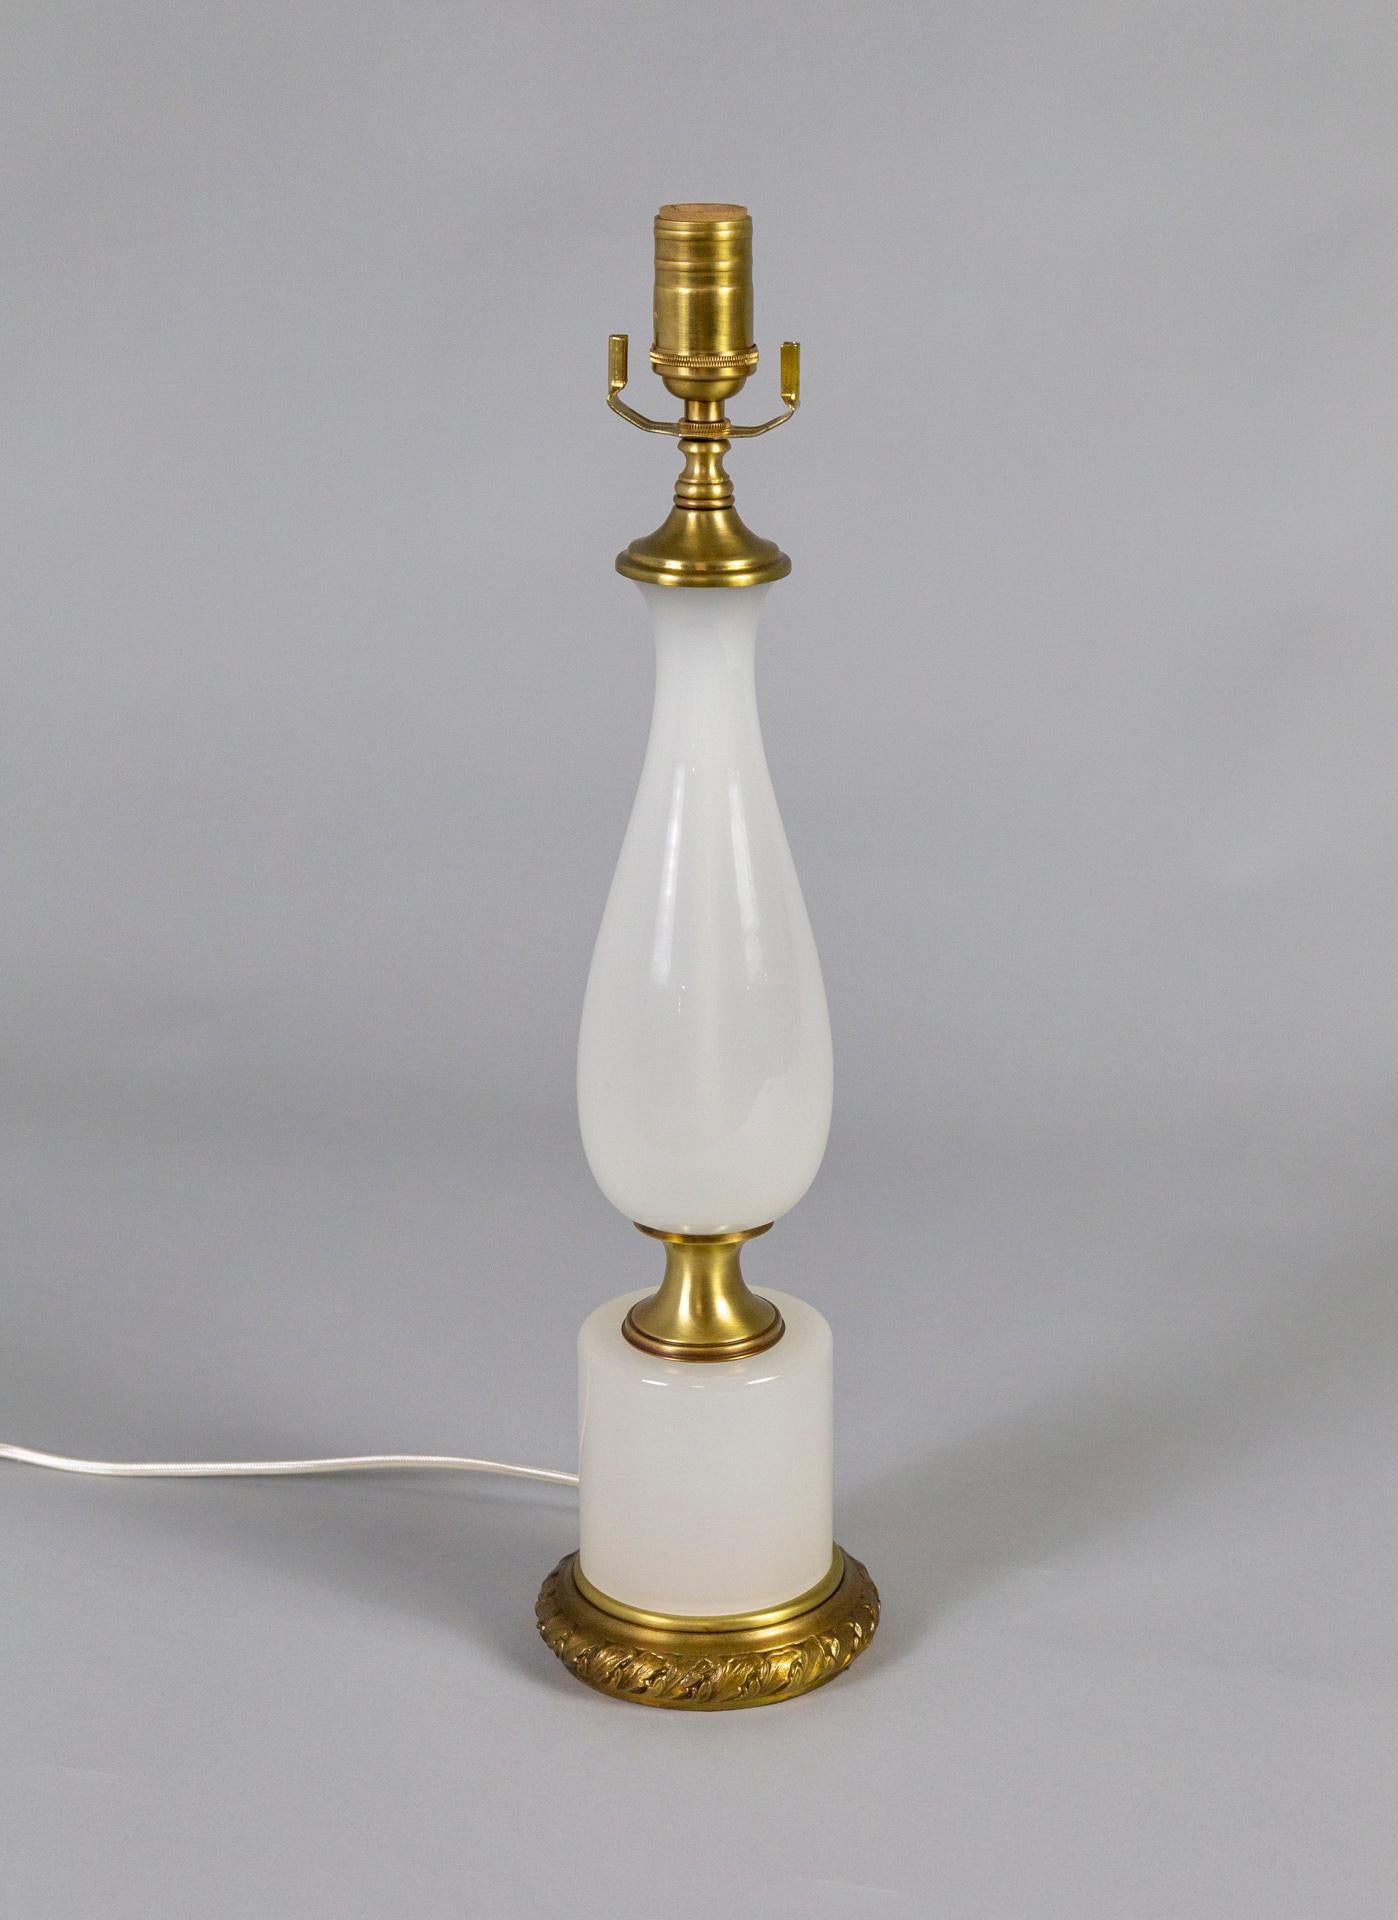 Mid-20th Cent. White Opaline Glass & Brass Lamp - Frederick Cooper For Sale 5